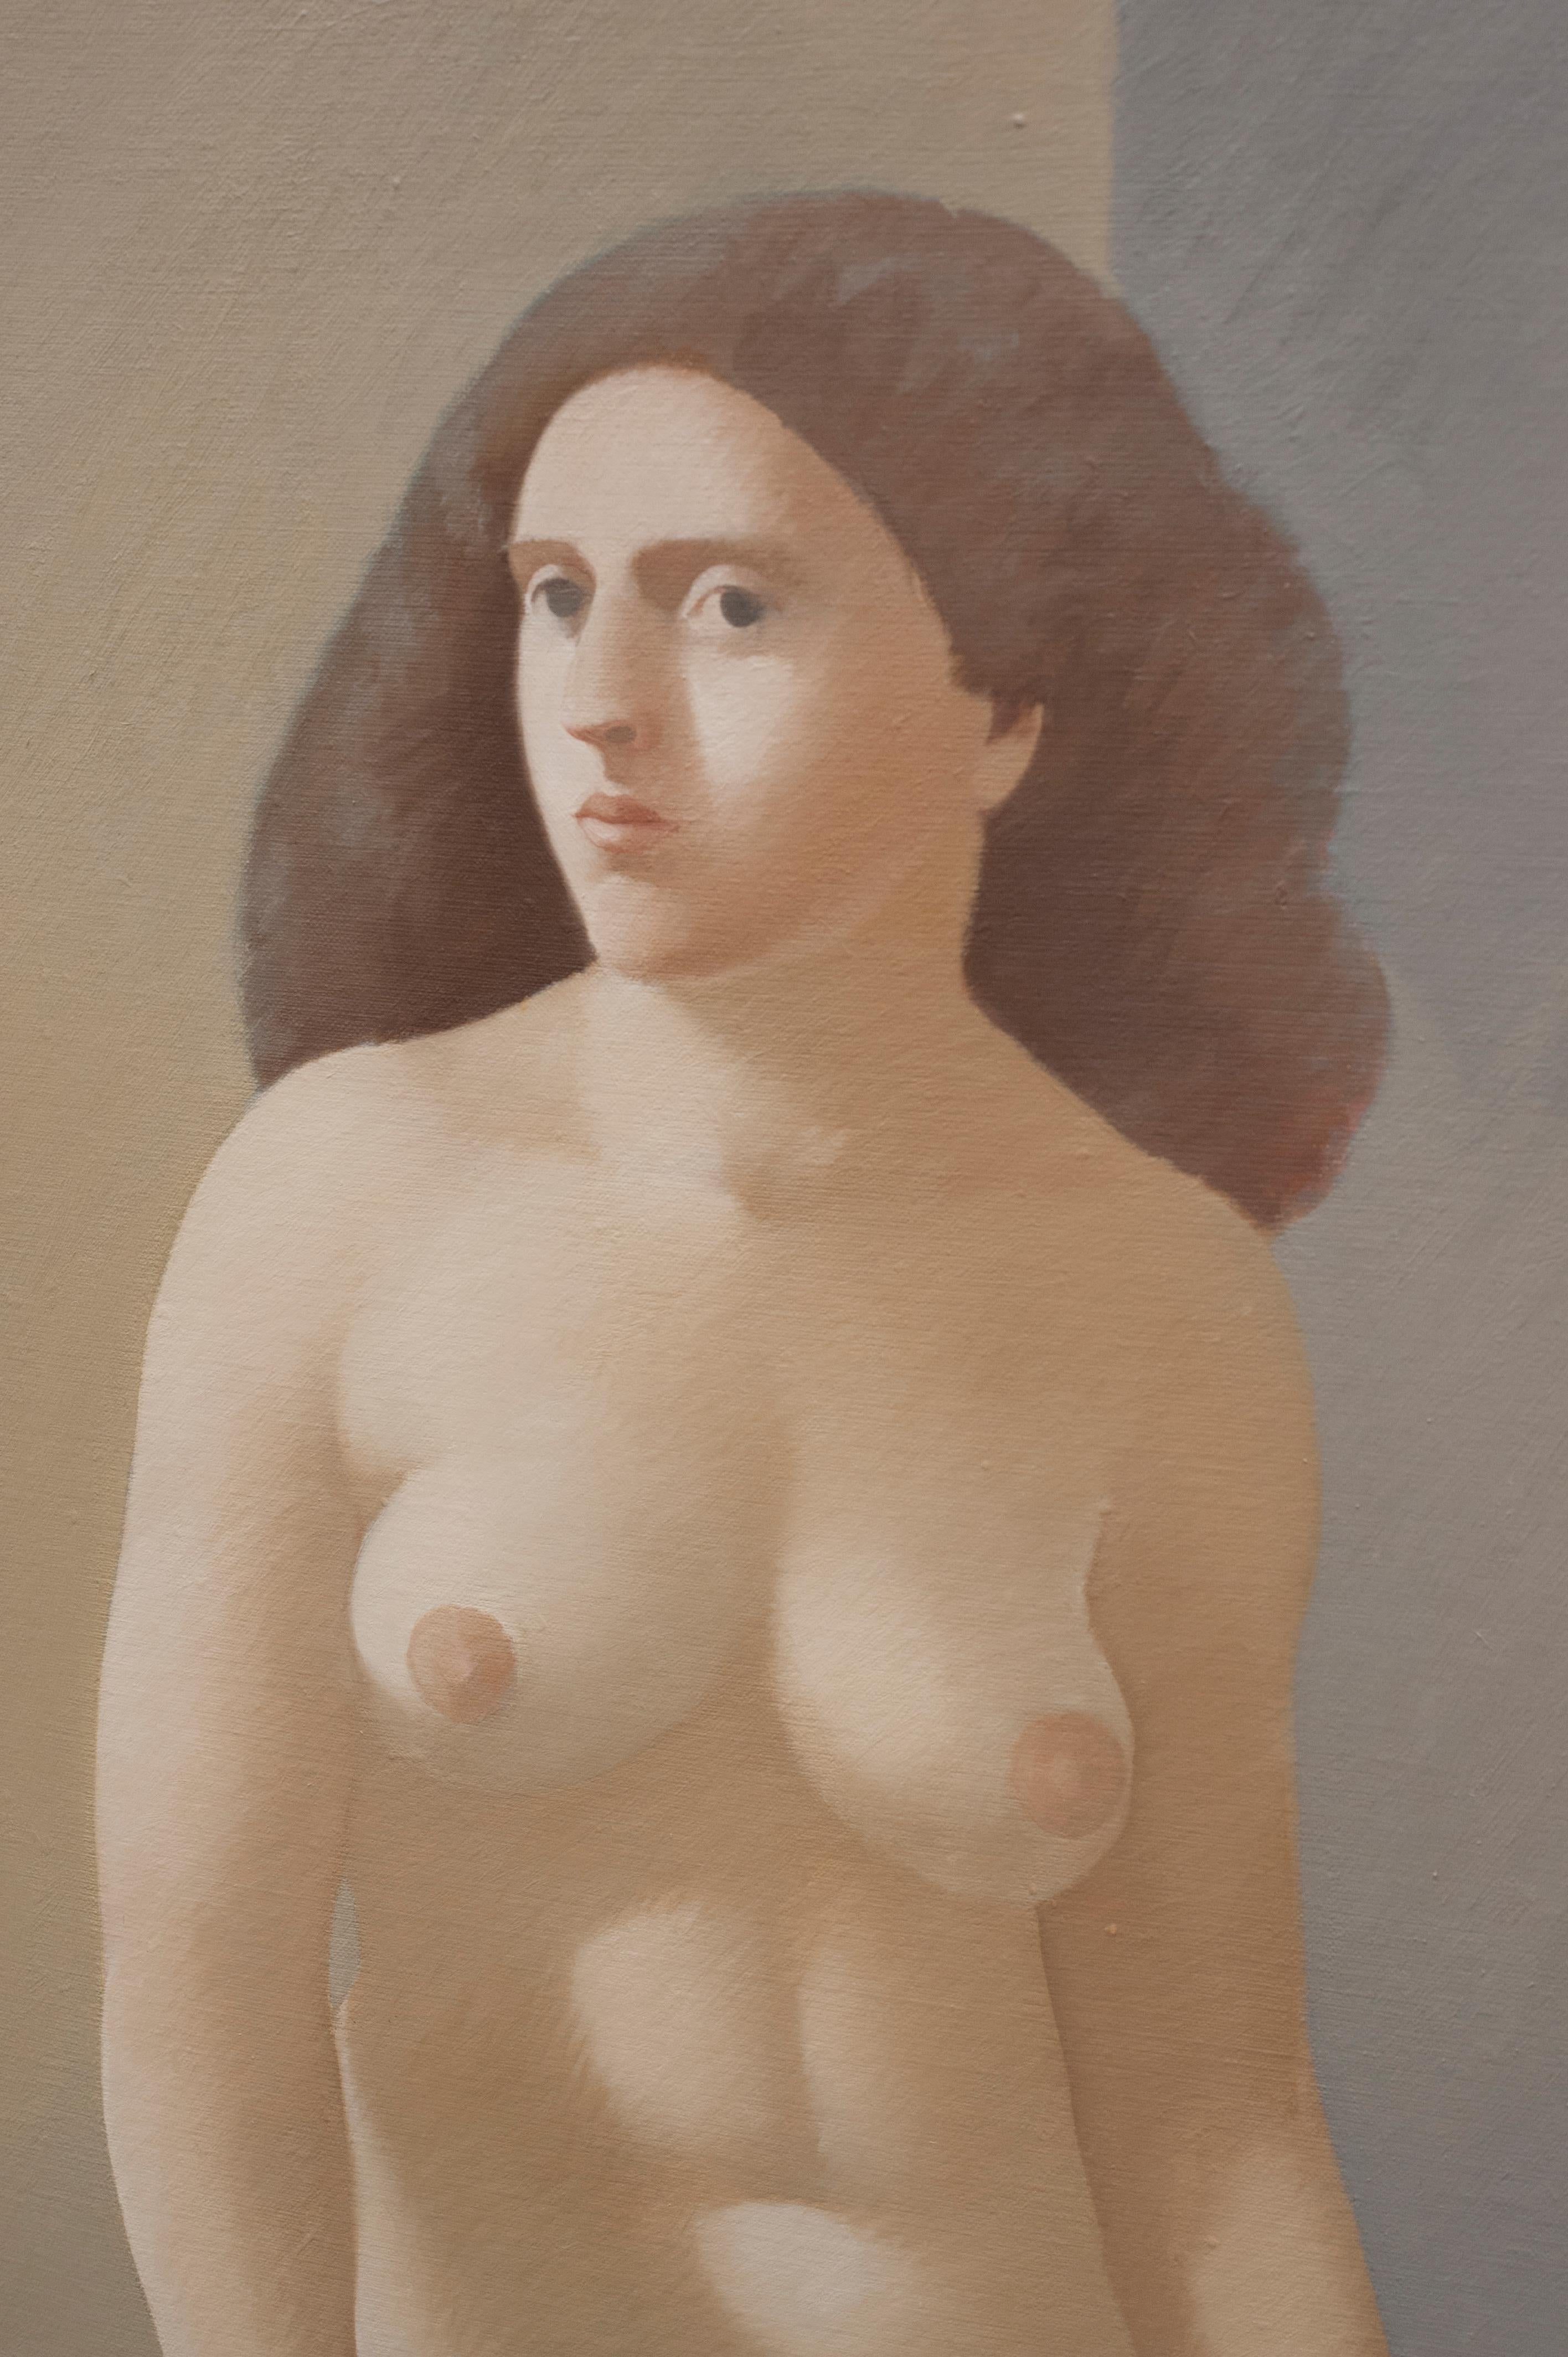 Oil on linen painting by Alan Feltus (b. 1943).  
Signed and dated on reverse 1974. 
Measures: 43 inches x 43 inches. Condition is excellent.  

Alan Feltus was born in Washington DC and is a figurative painter of contemporary classicism.   Alan